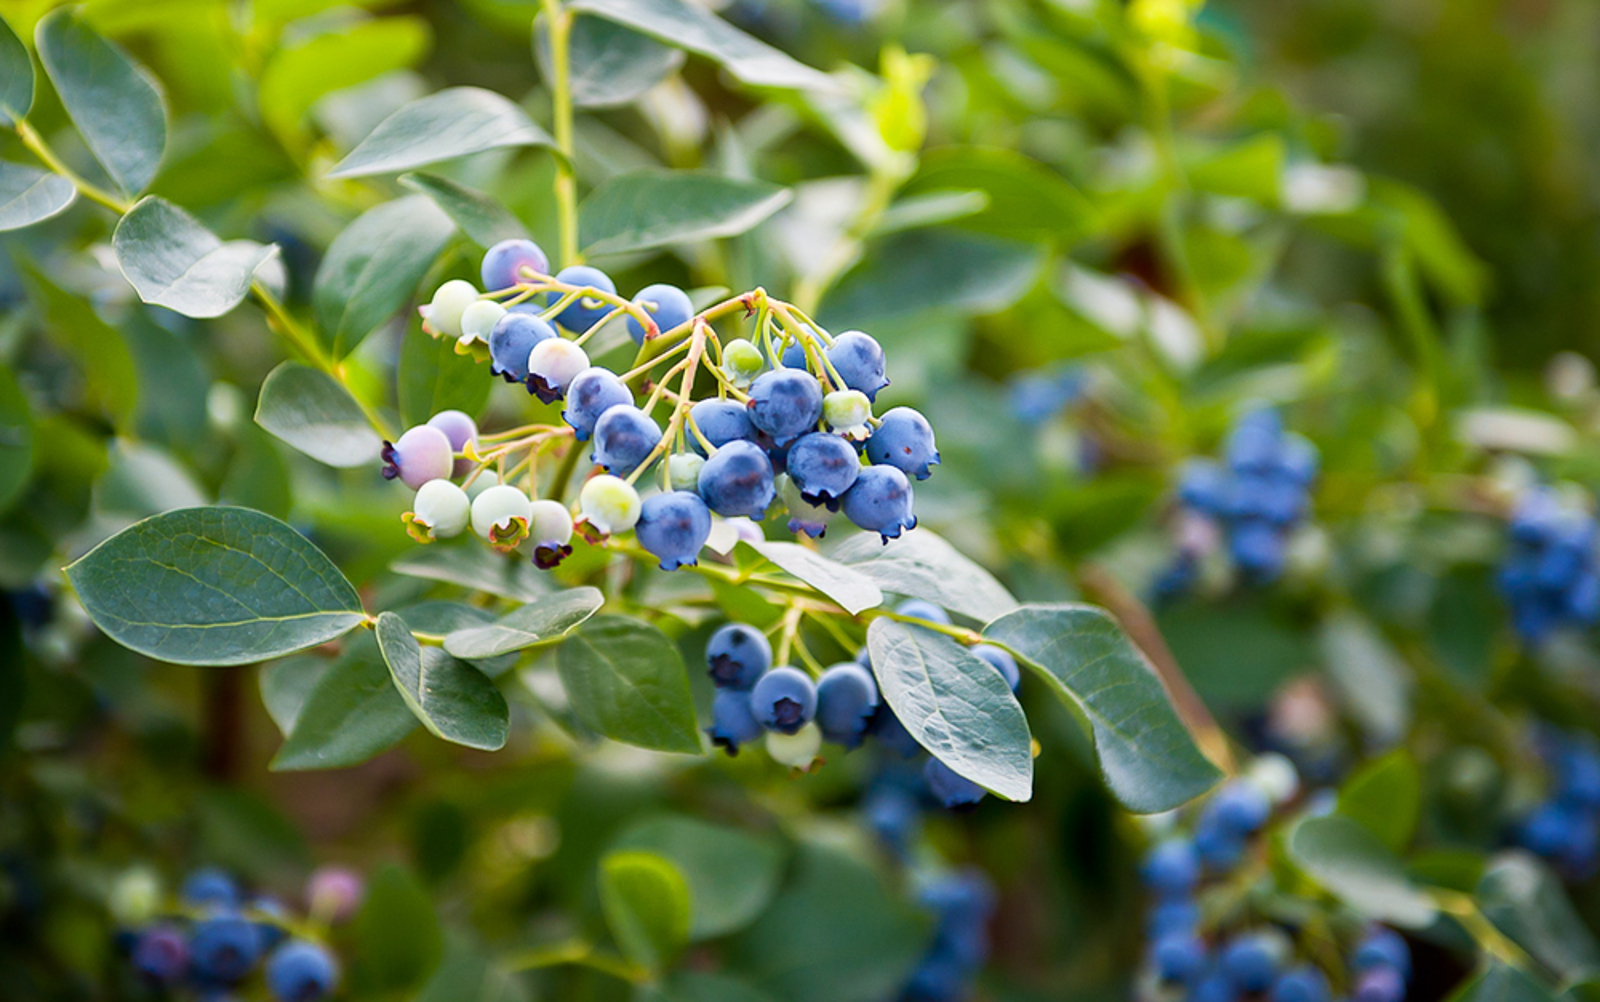 Blueberries on plant